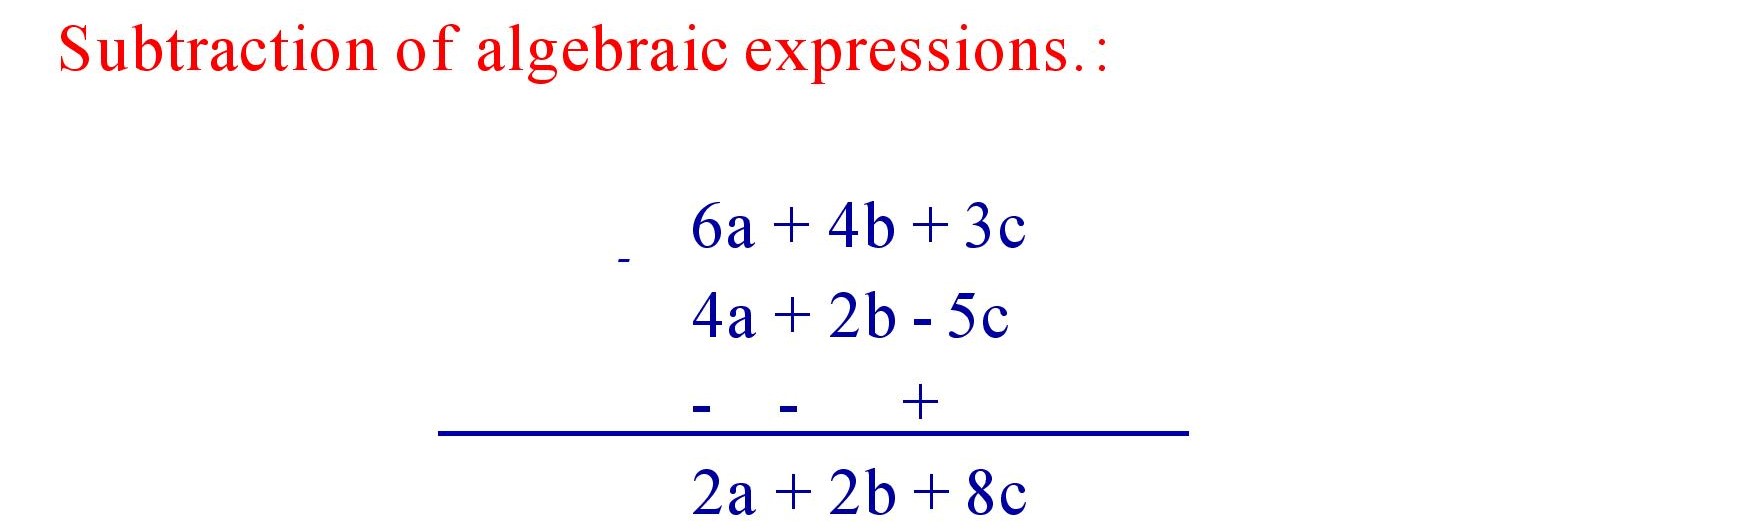 Subtraction of algebraic expressions